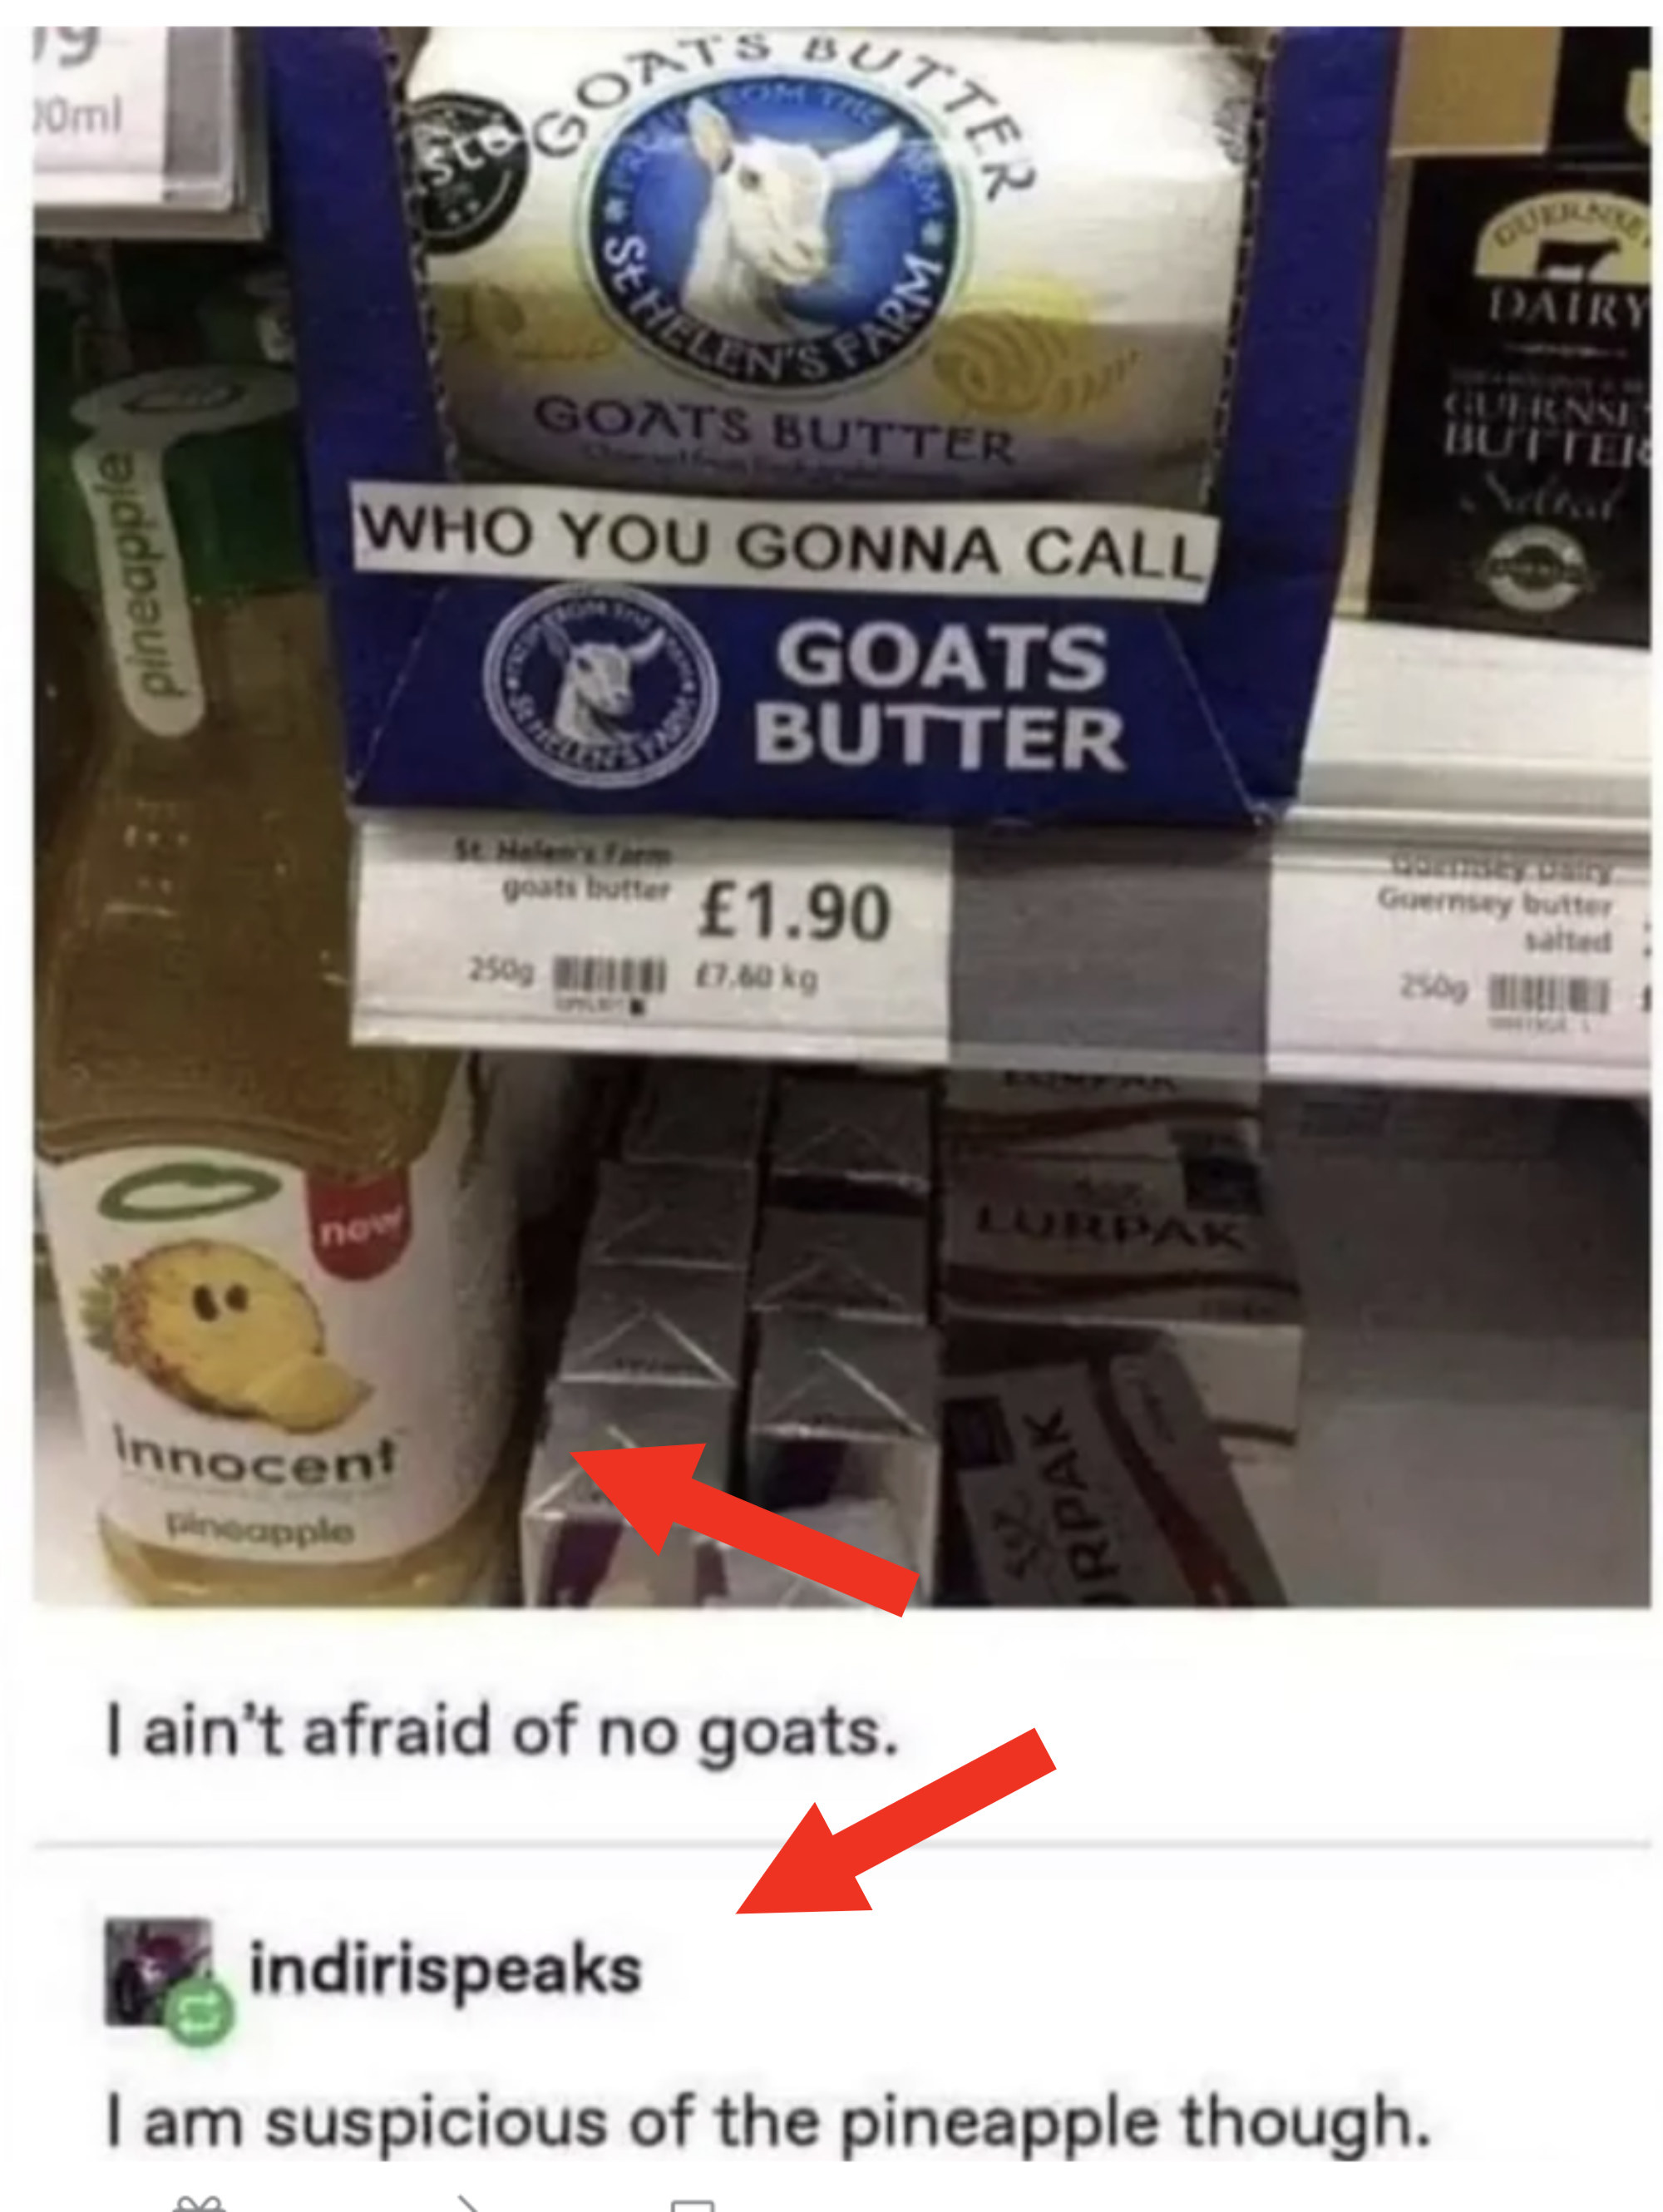 A picture says &quot;who you gonna call&quot; over a brand called Goats Butter, and a commenter says &quot;I am suspicious of the pineapple though&quot;; in the photo, you can see a brand of pineapple juice called Innocent